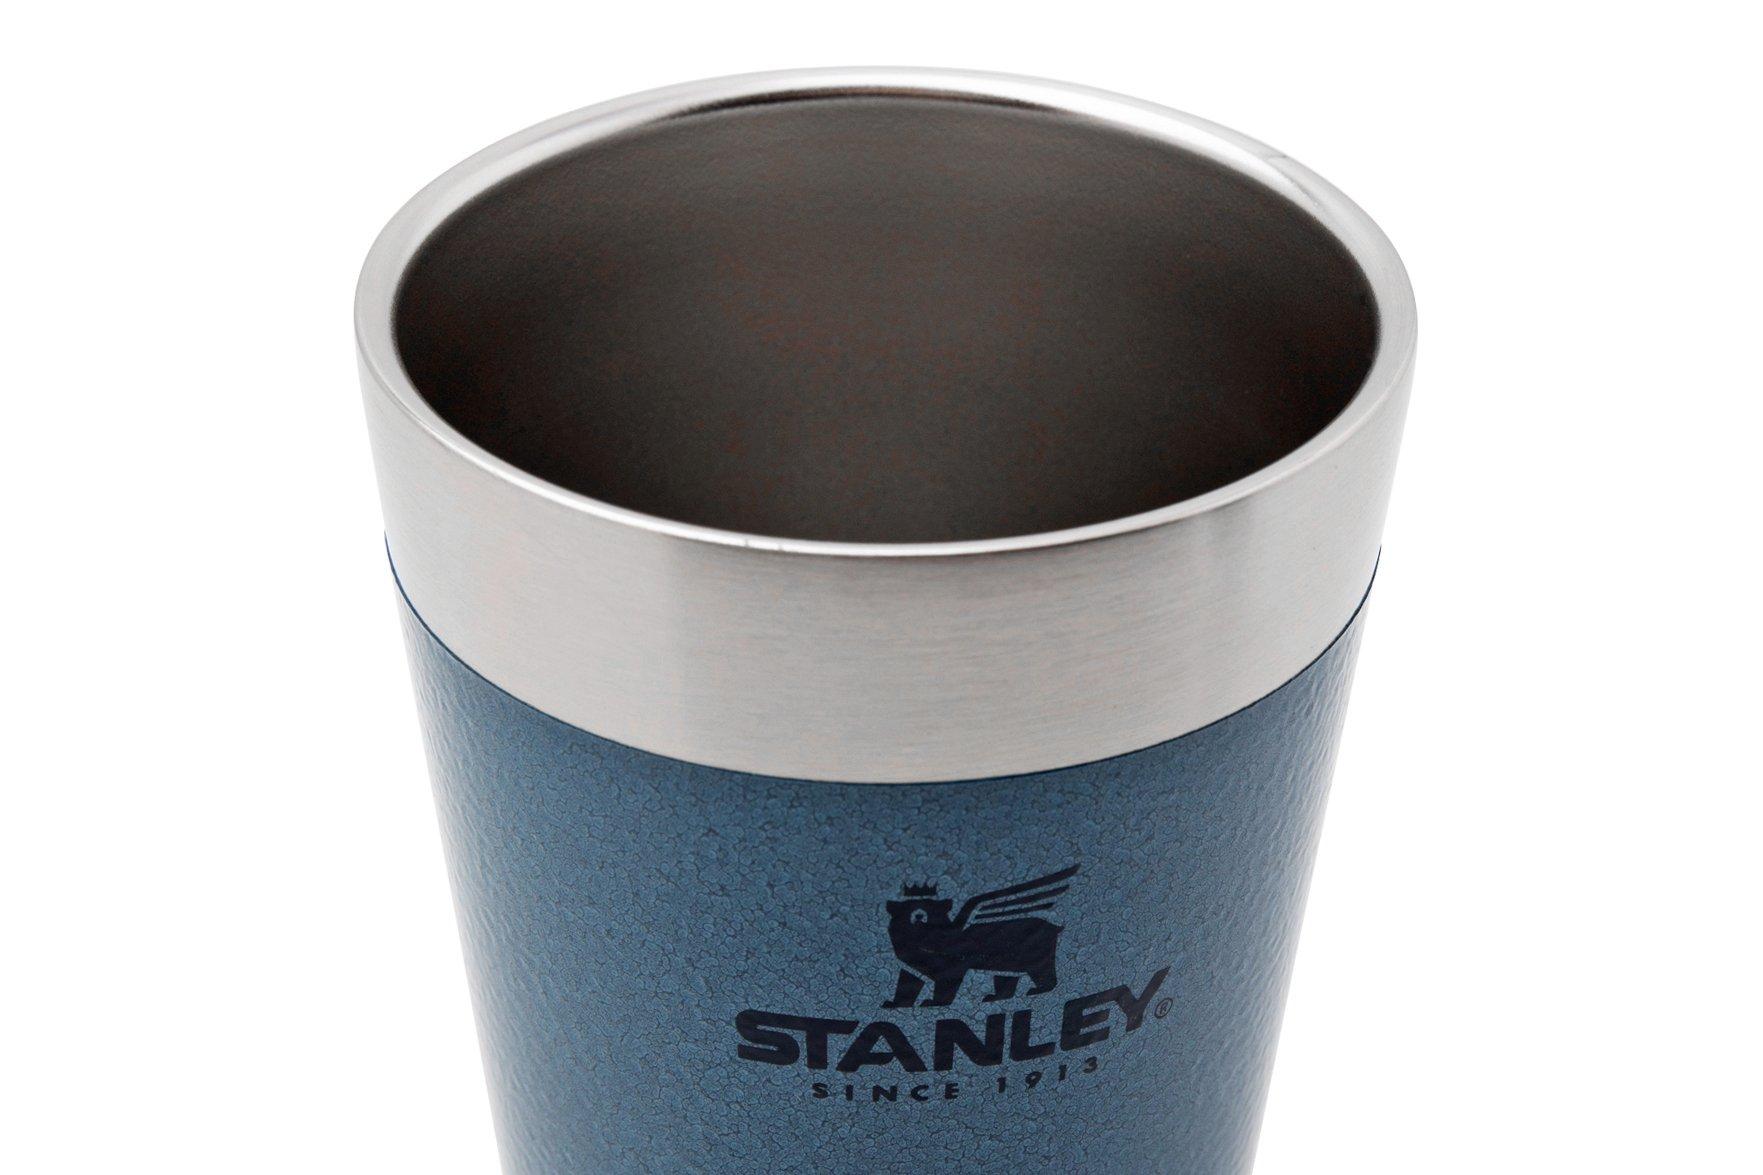 This No. 1 bestselling Stanley tumbler is on sale at